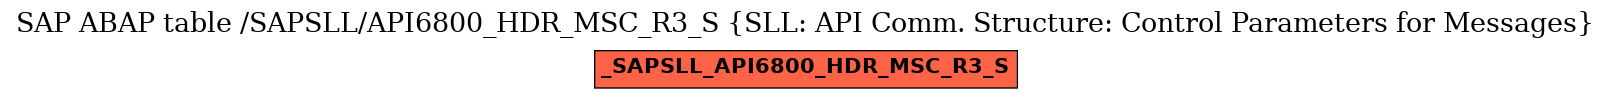 E-R Diagram for table /SAPSLL/API6800_HDR_MSC_R3_S (SLL: API Comm. Structure: Control Parameters for Messages)